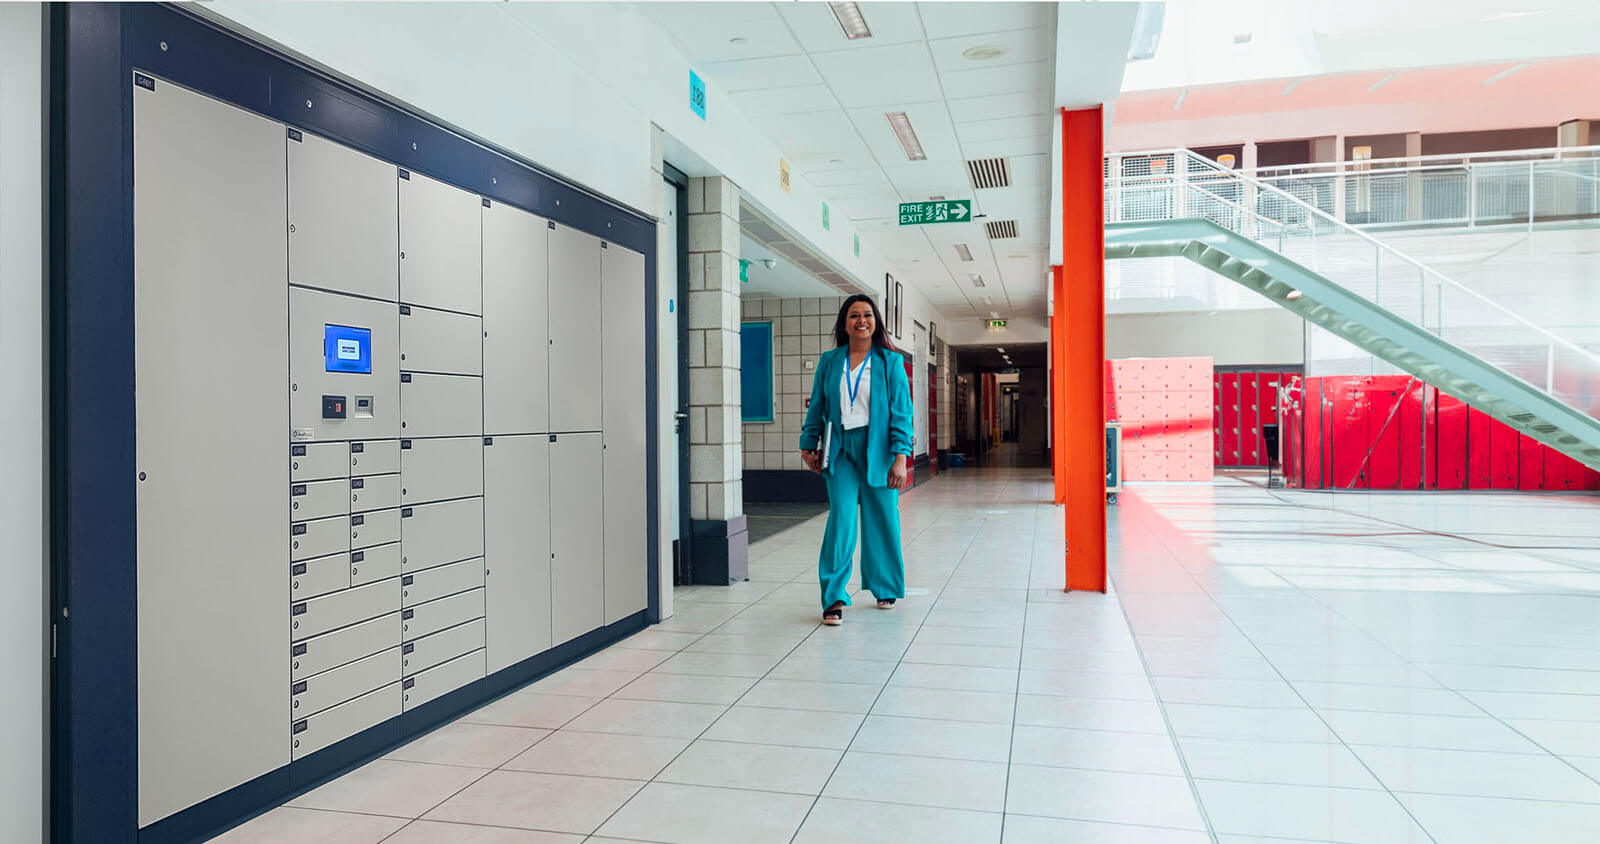 A healthcare institution employee walks next to an AssetTracer smart locker system made by Real Time Networks